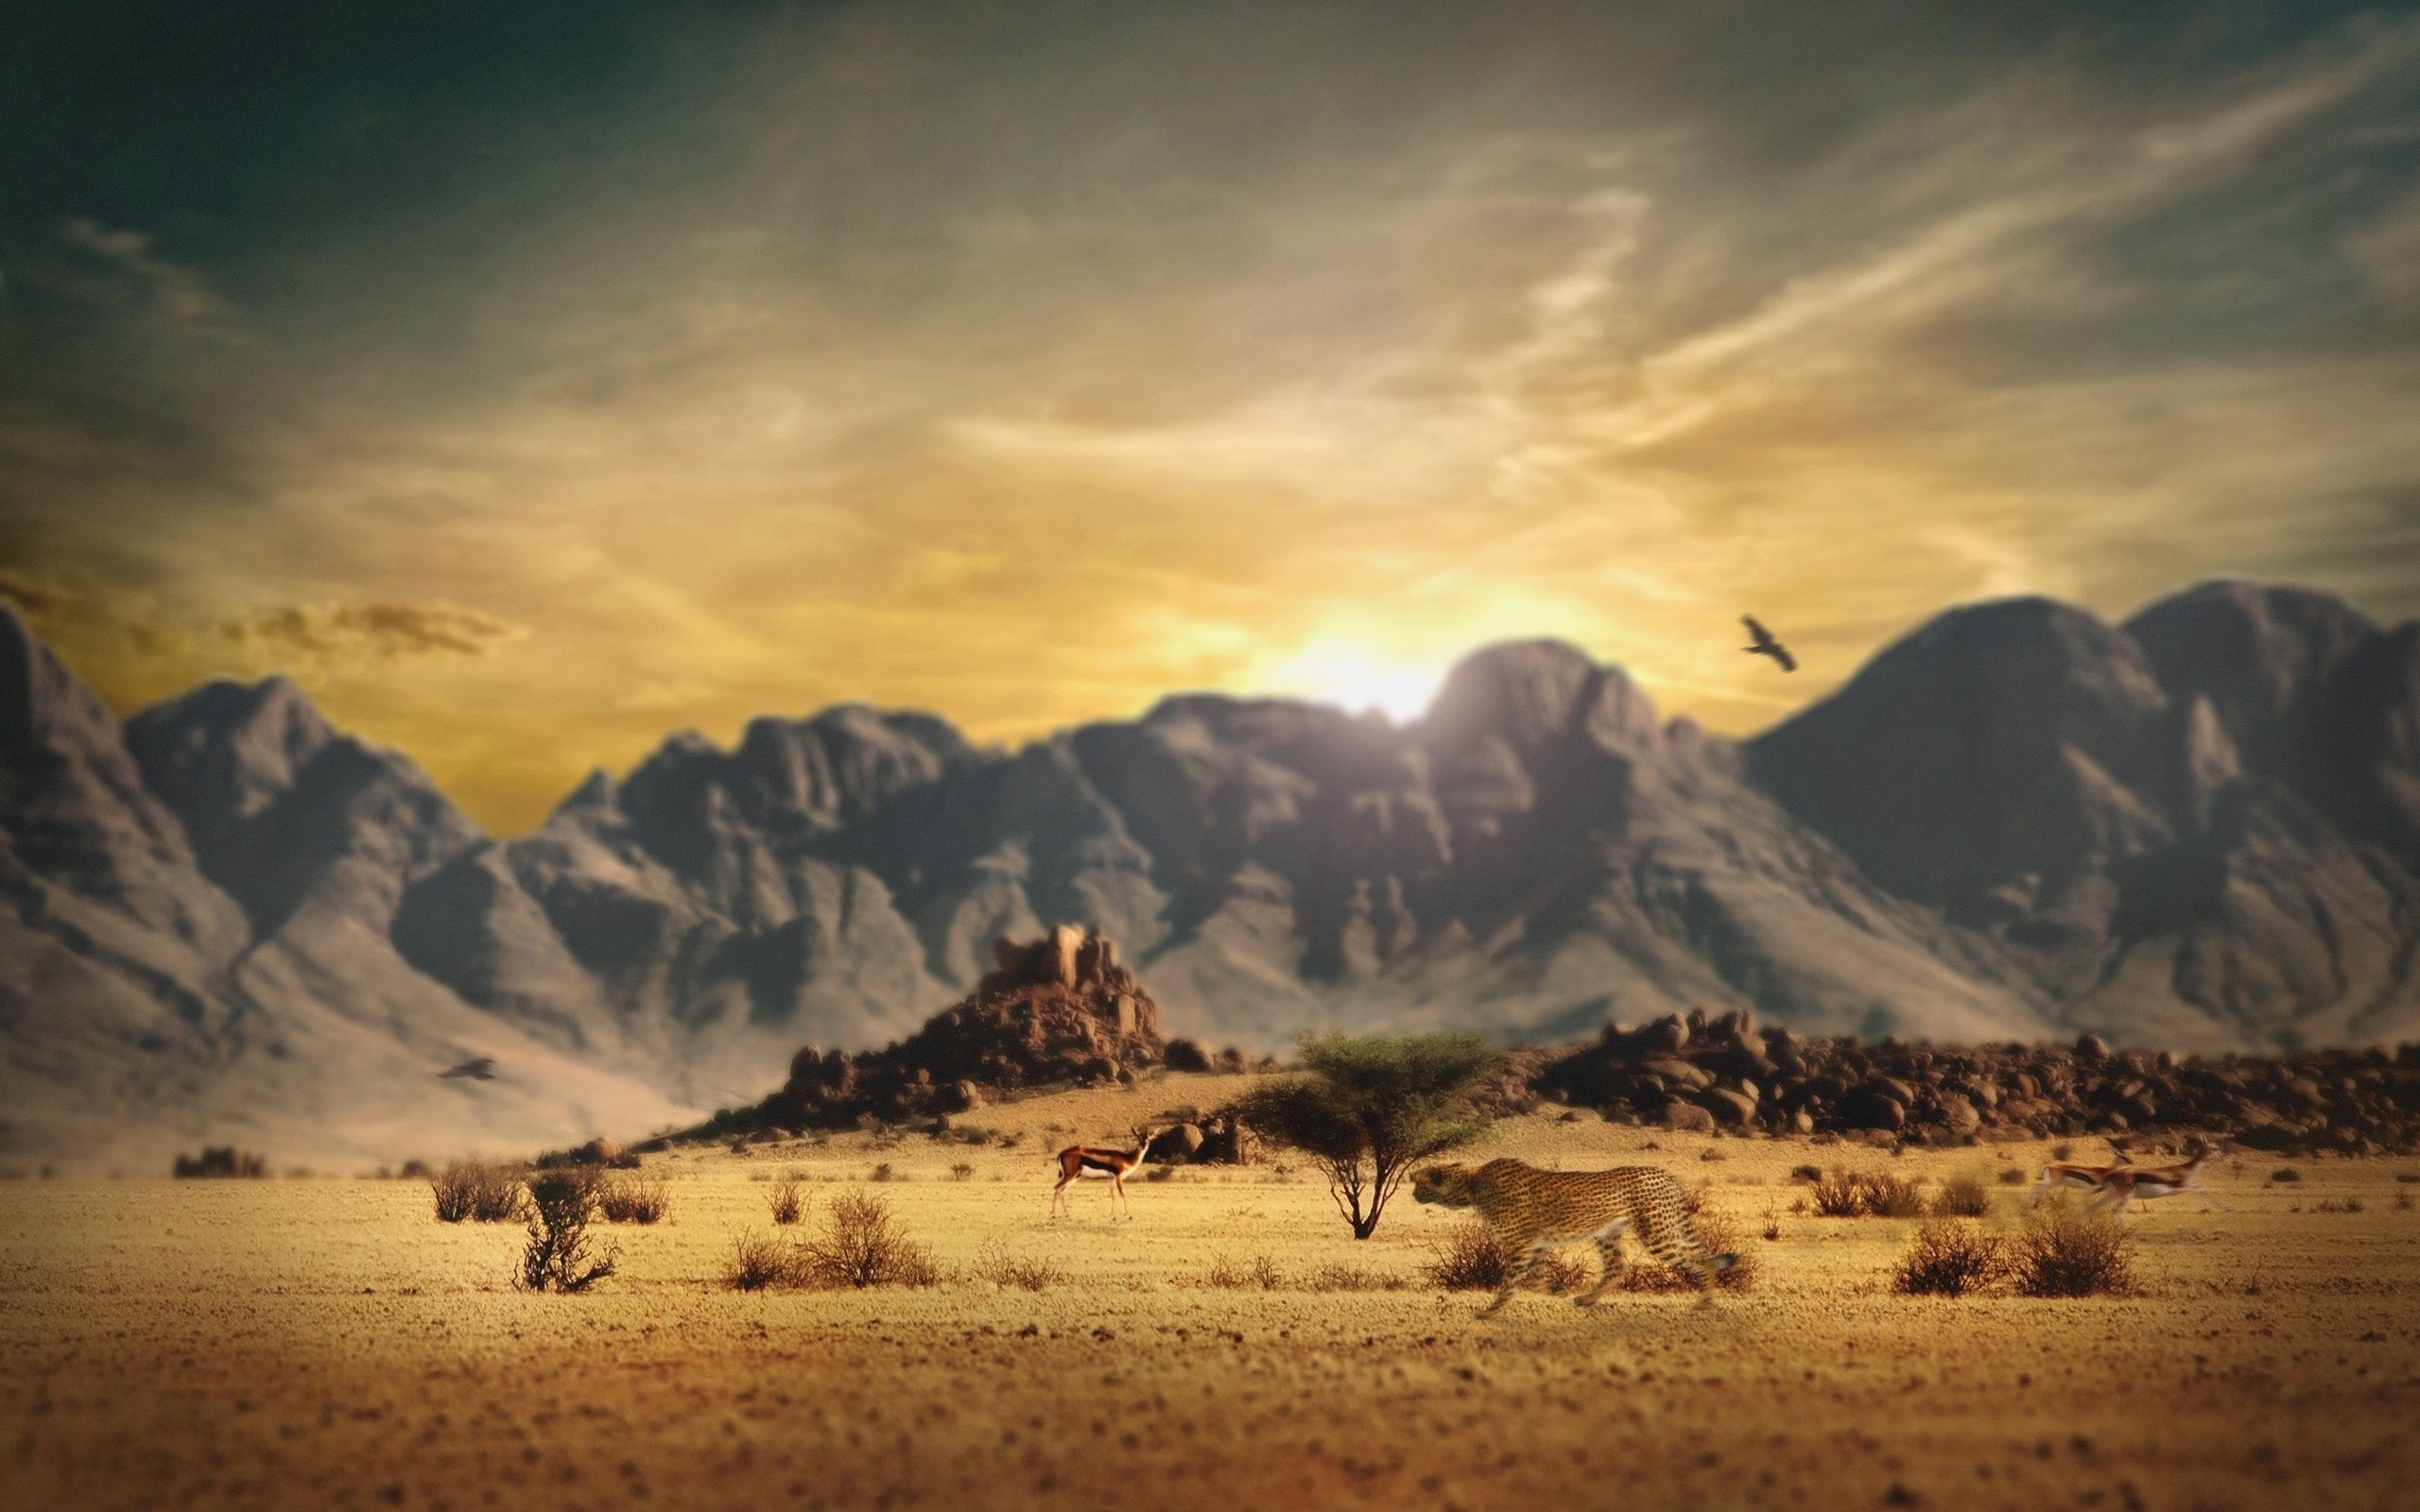 2560x1600 1131x707 Assassin's Creed Wild West by vancent7 on DeviantArt">